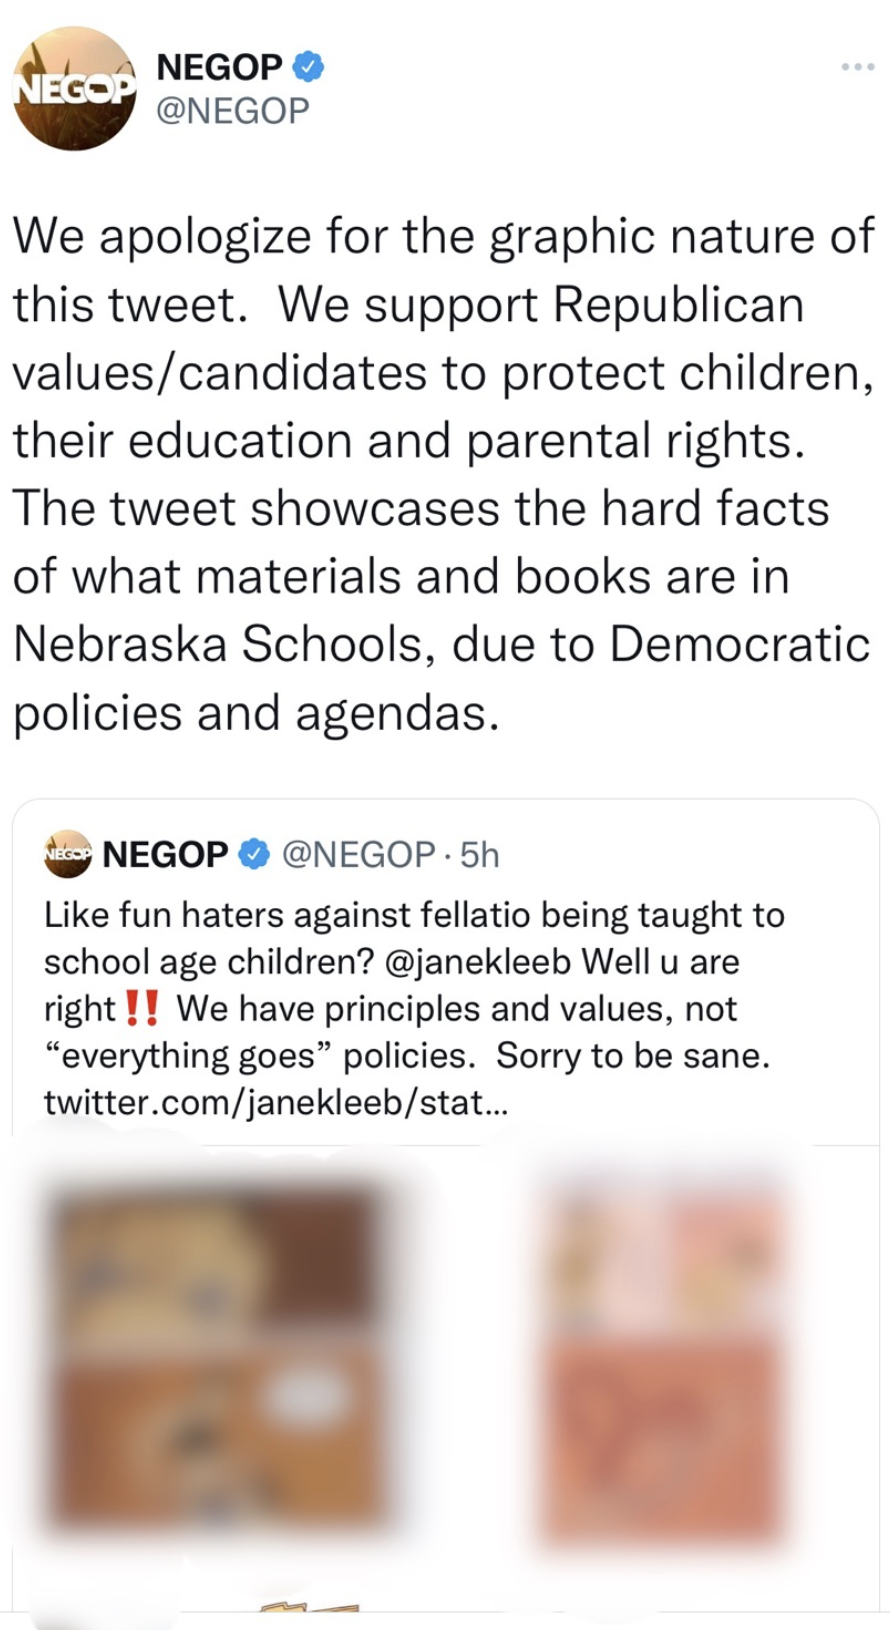 his is a blurred screen capture of the second tweet that the Nebraska Republican Party sent out using its official Twitter account. The image has been blurred here to prevent sharing sensitive content.